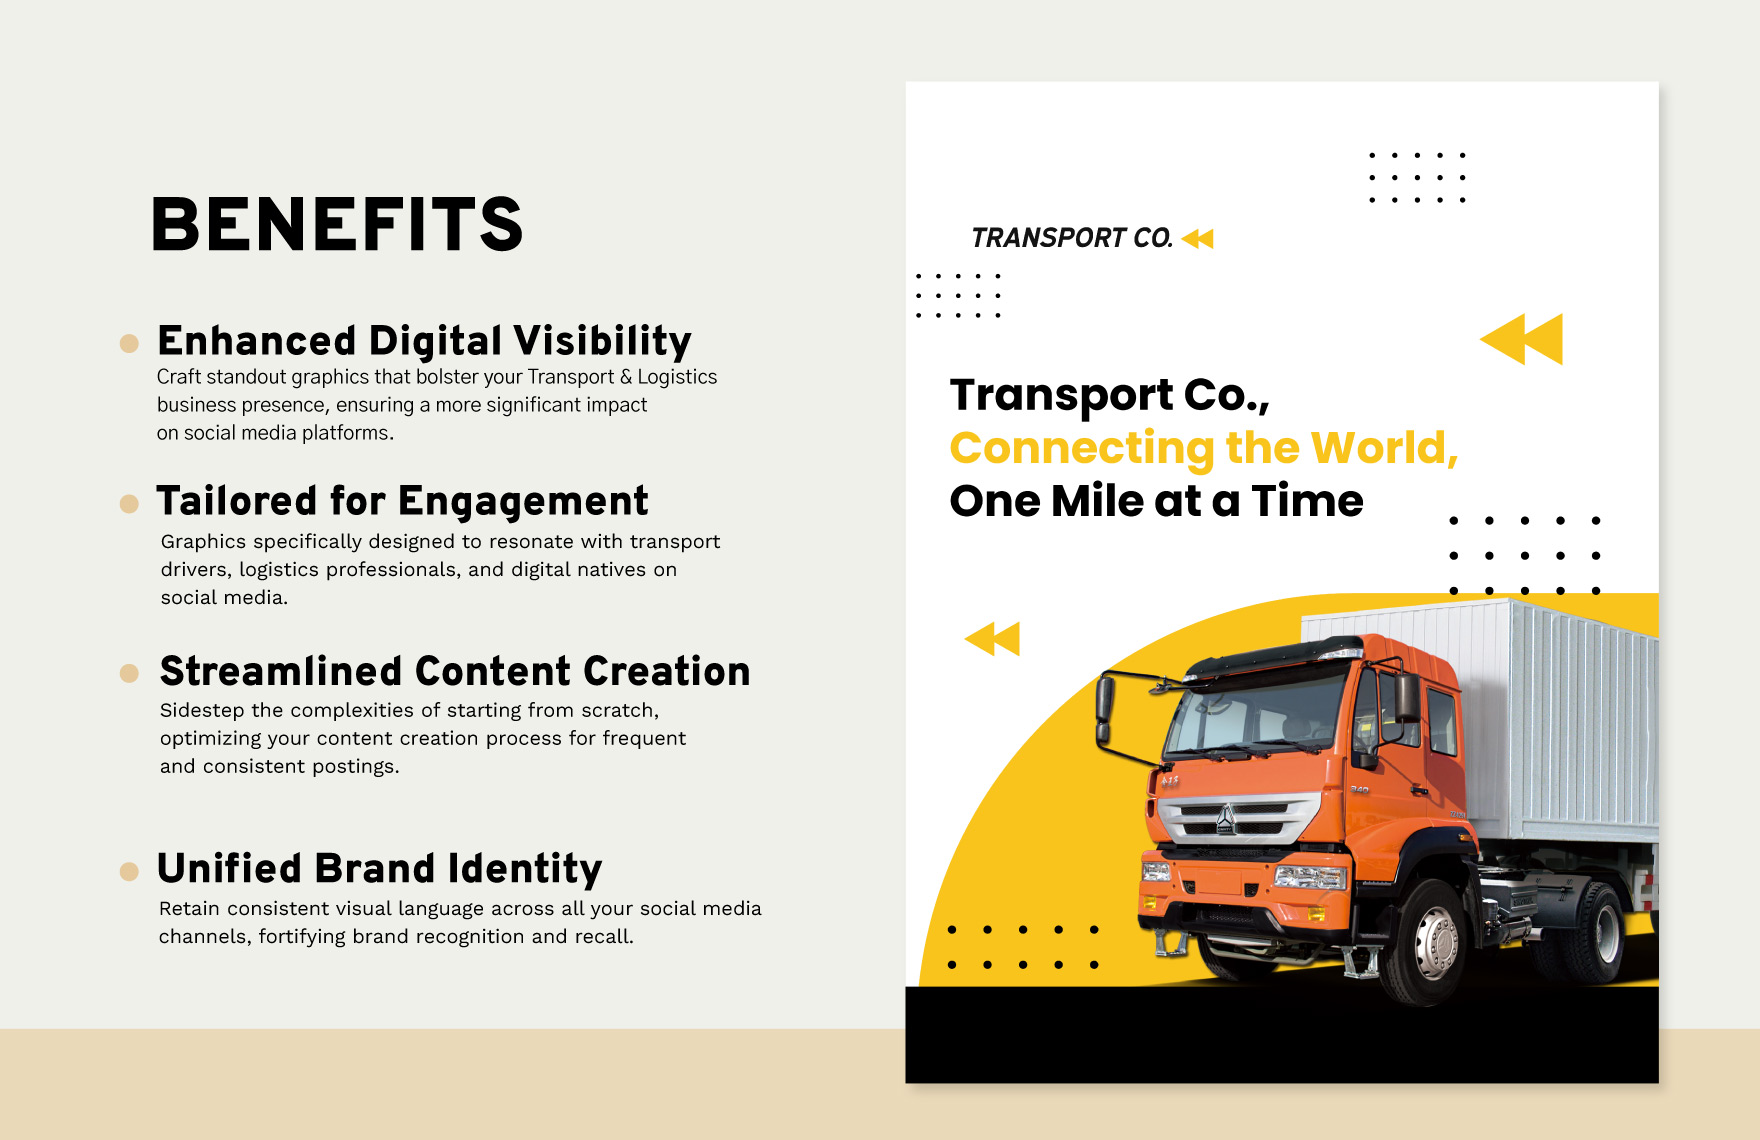 Transport and Logistics Threads Post Template